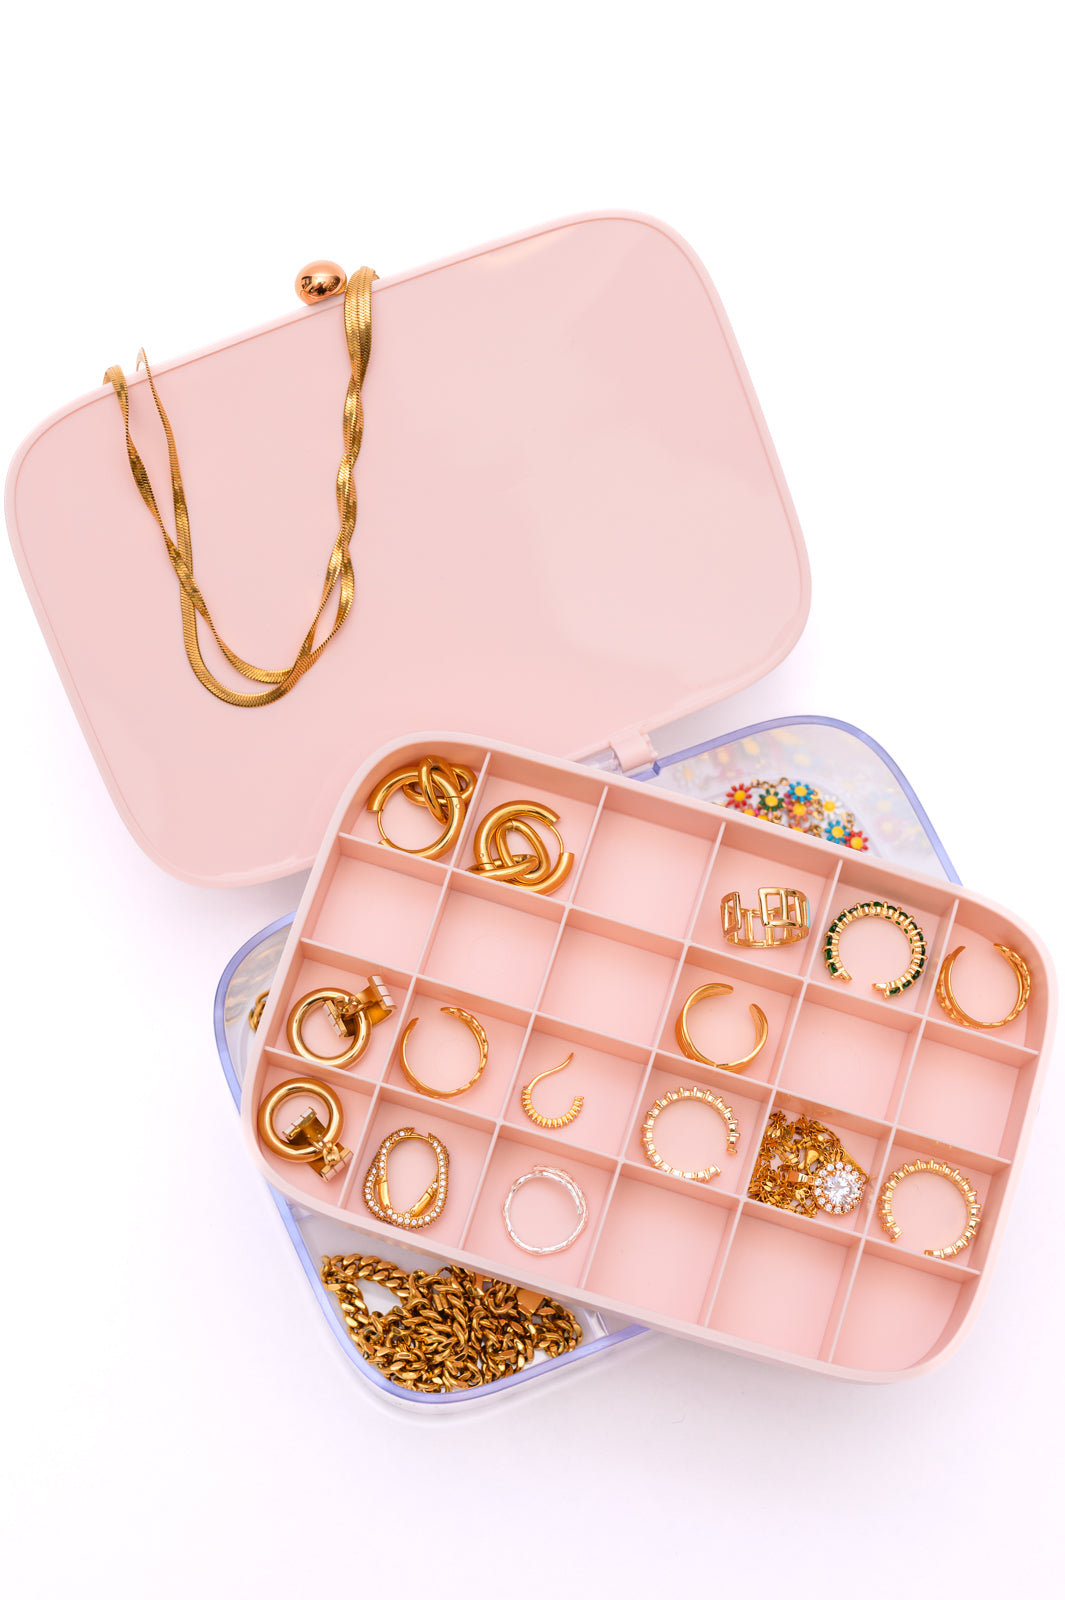 All Sorted Out Jewelry Storage Case in Pink-Ever Joy